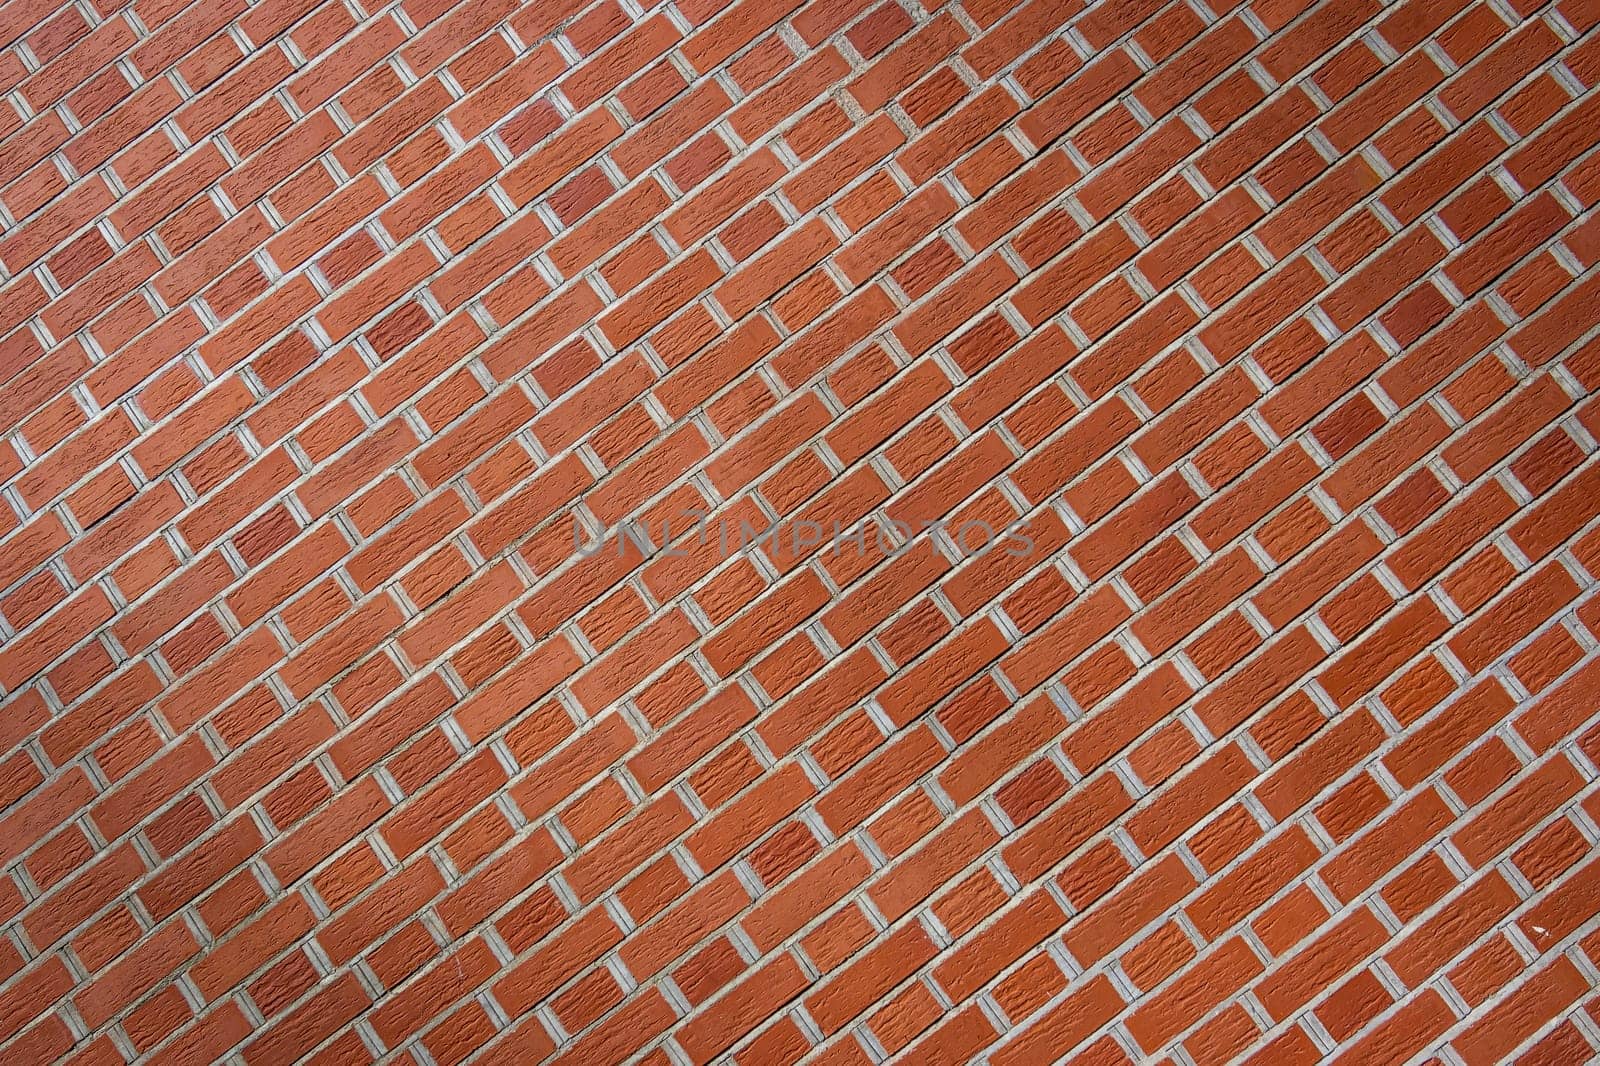 old red brick wall texture background 1